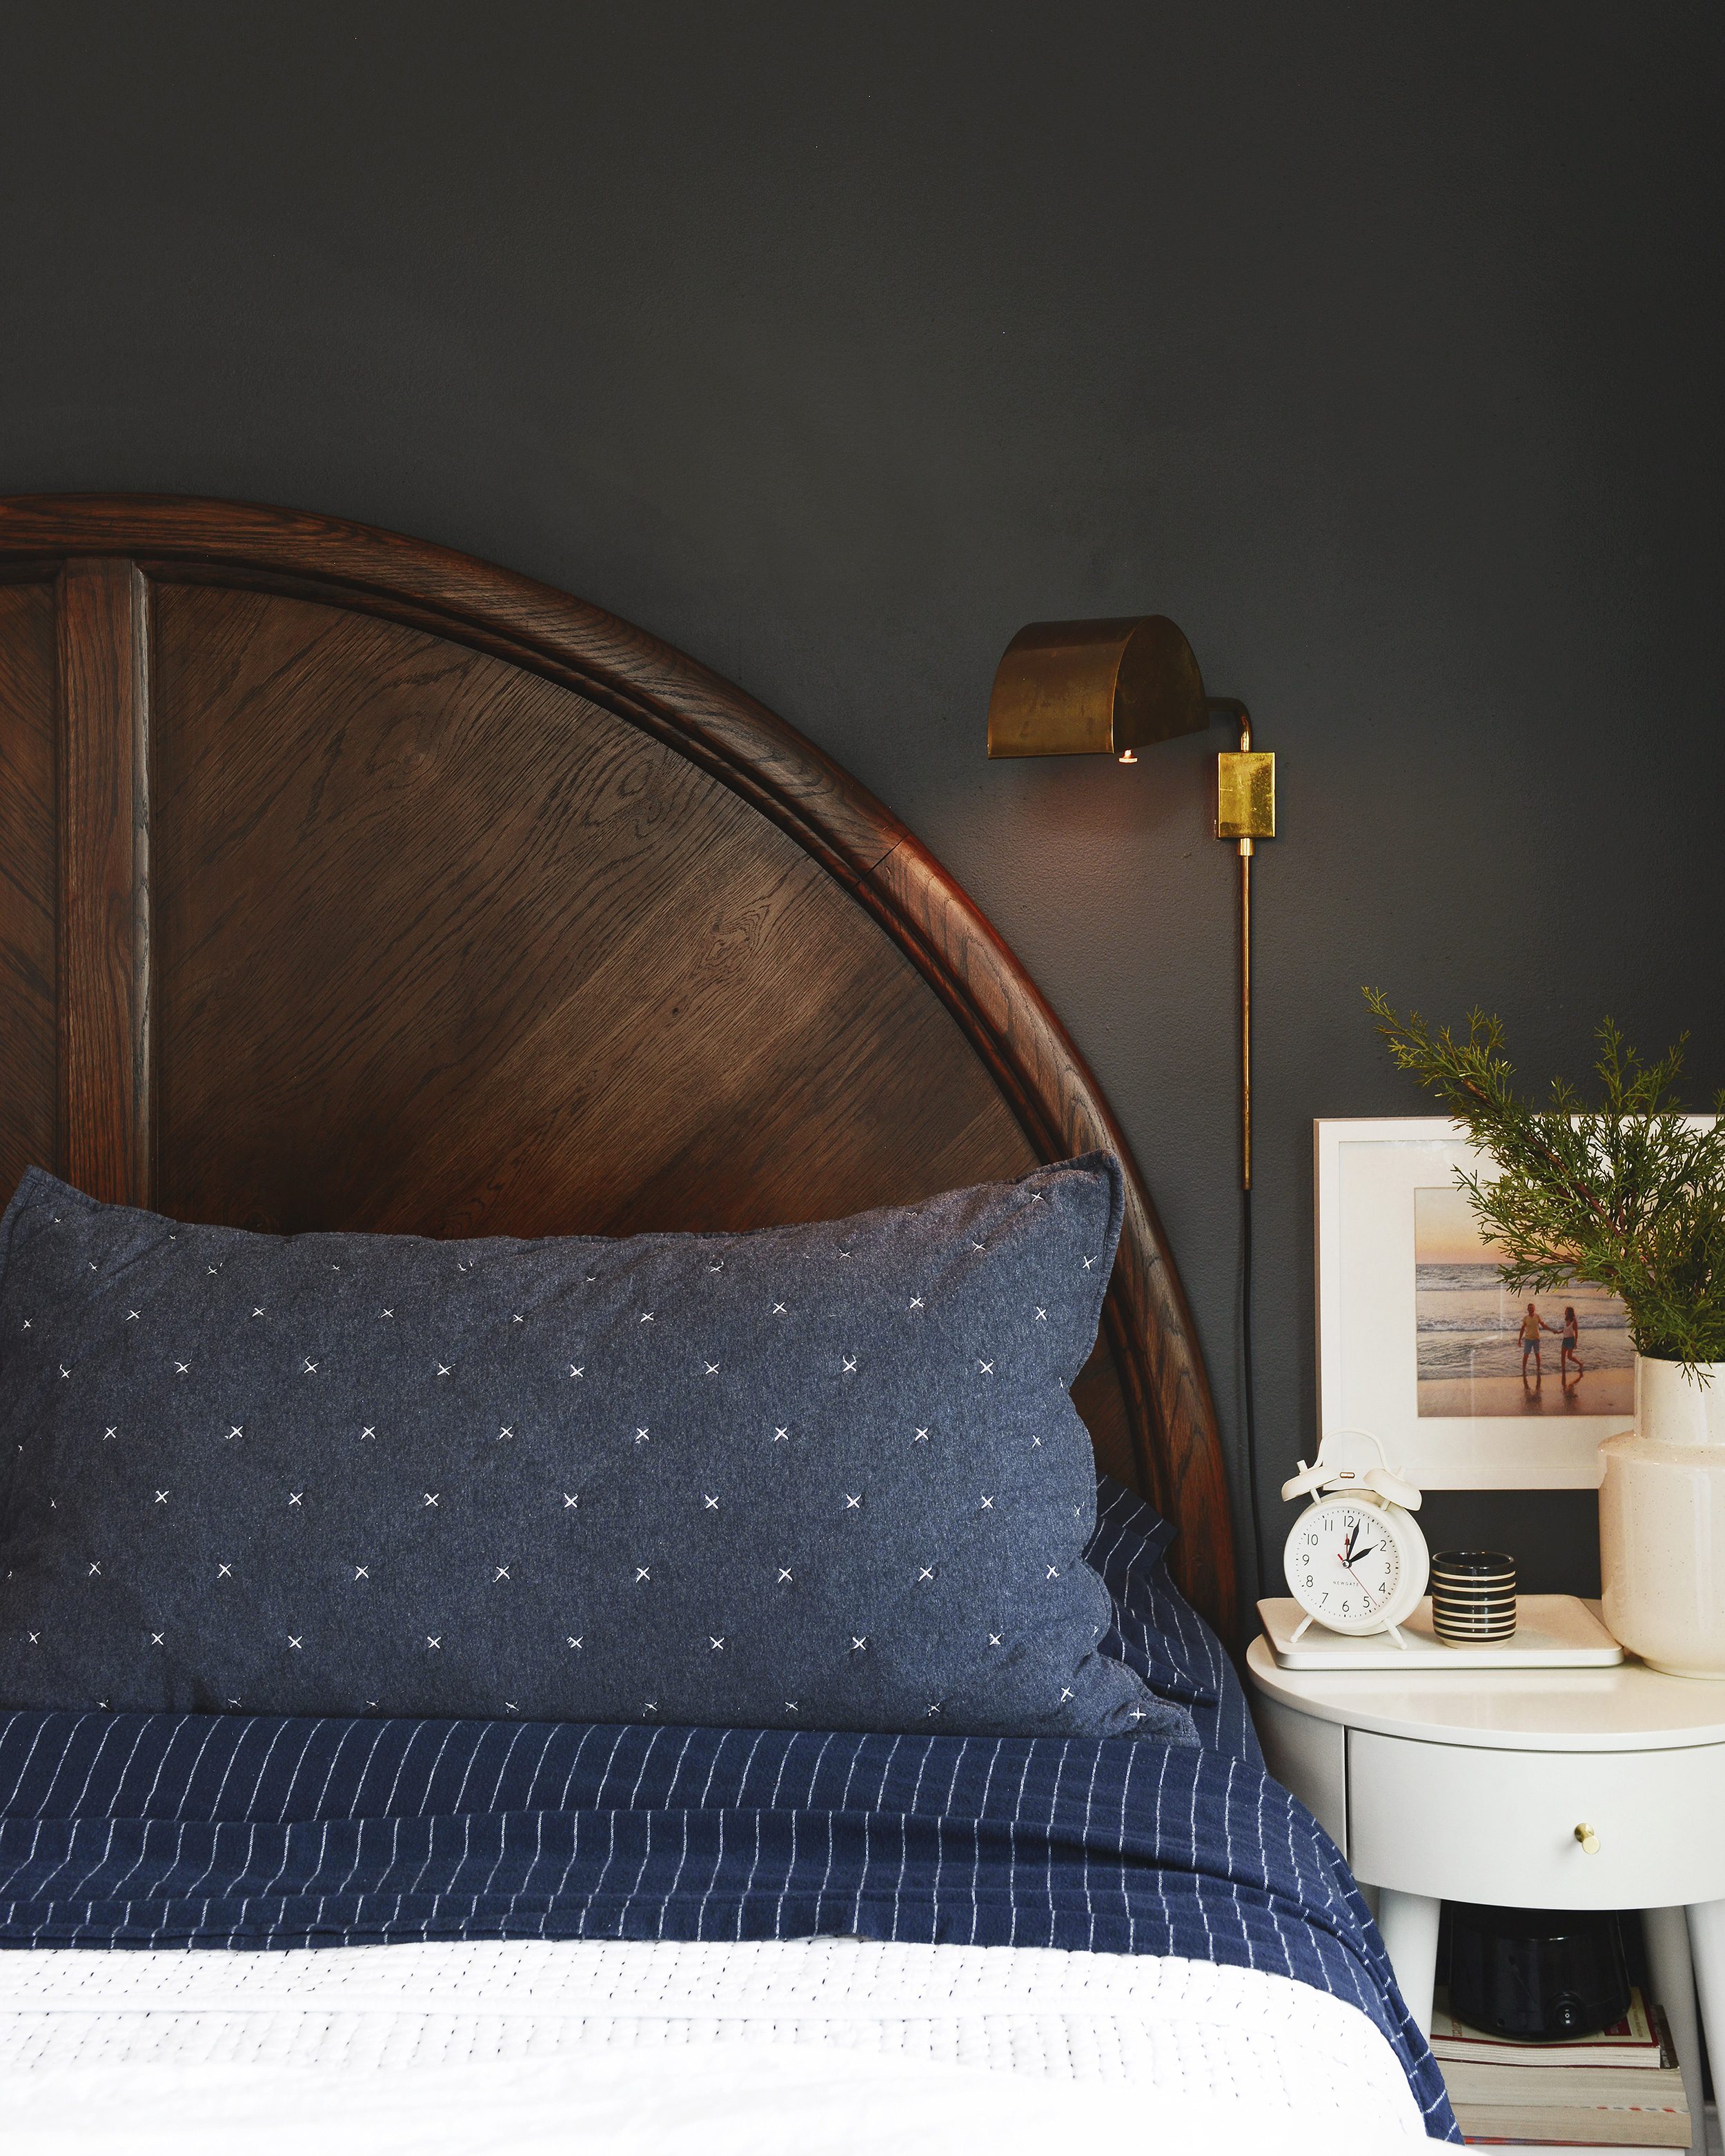 vignette of navy bedding and a round wooden headboard | via Yellow Brick Home